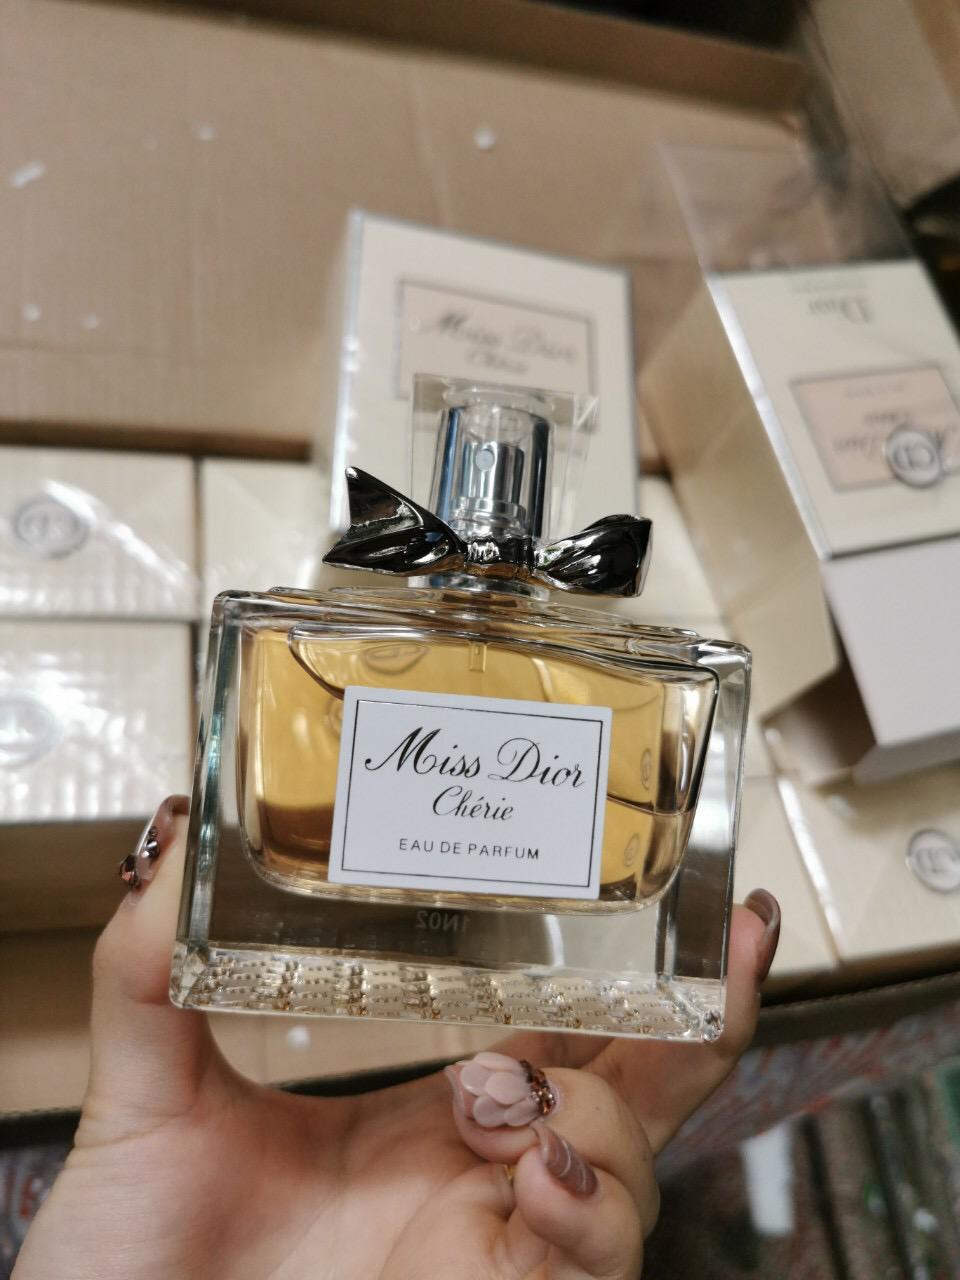 Fragrance Outlet  Miss Dior by Dior Sometime during 2012 the house of Dior  renamed its already reformulated Miss Dior Cherie perfume line the original  Miss Dior Cherie was launched in 2005